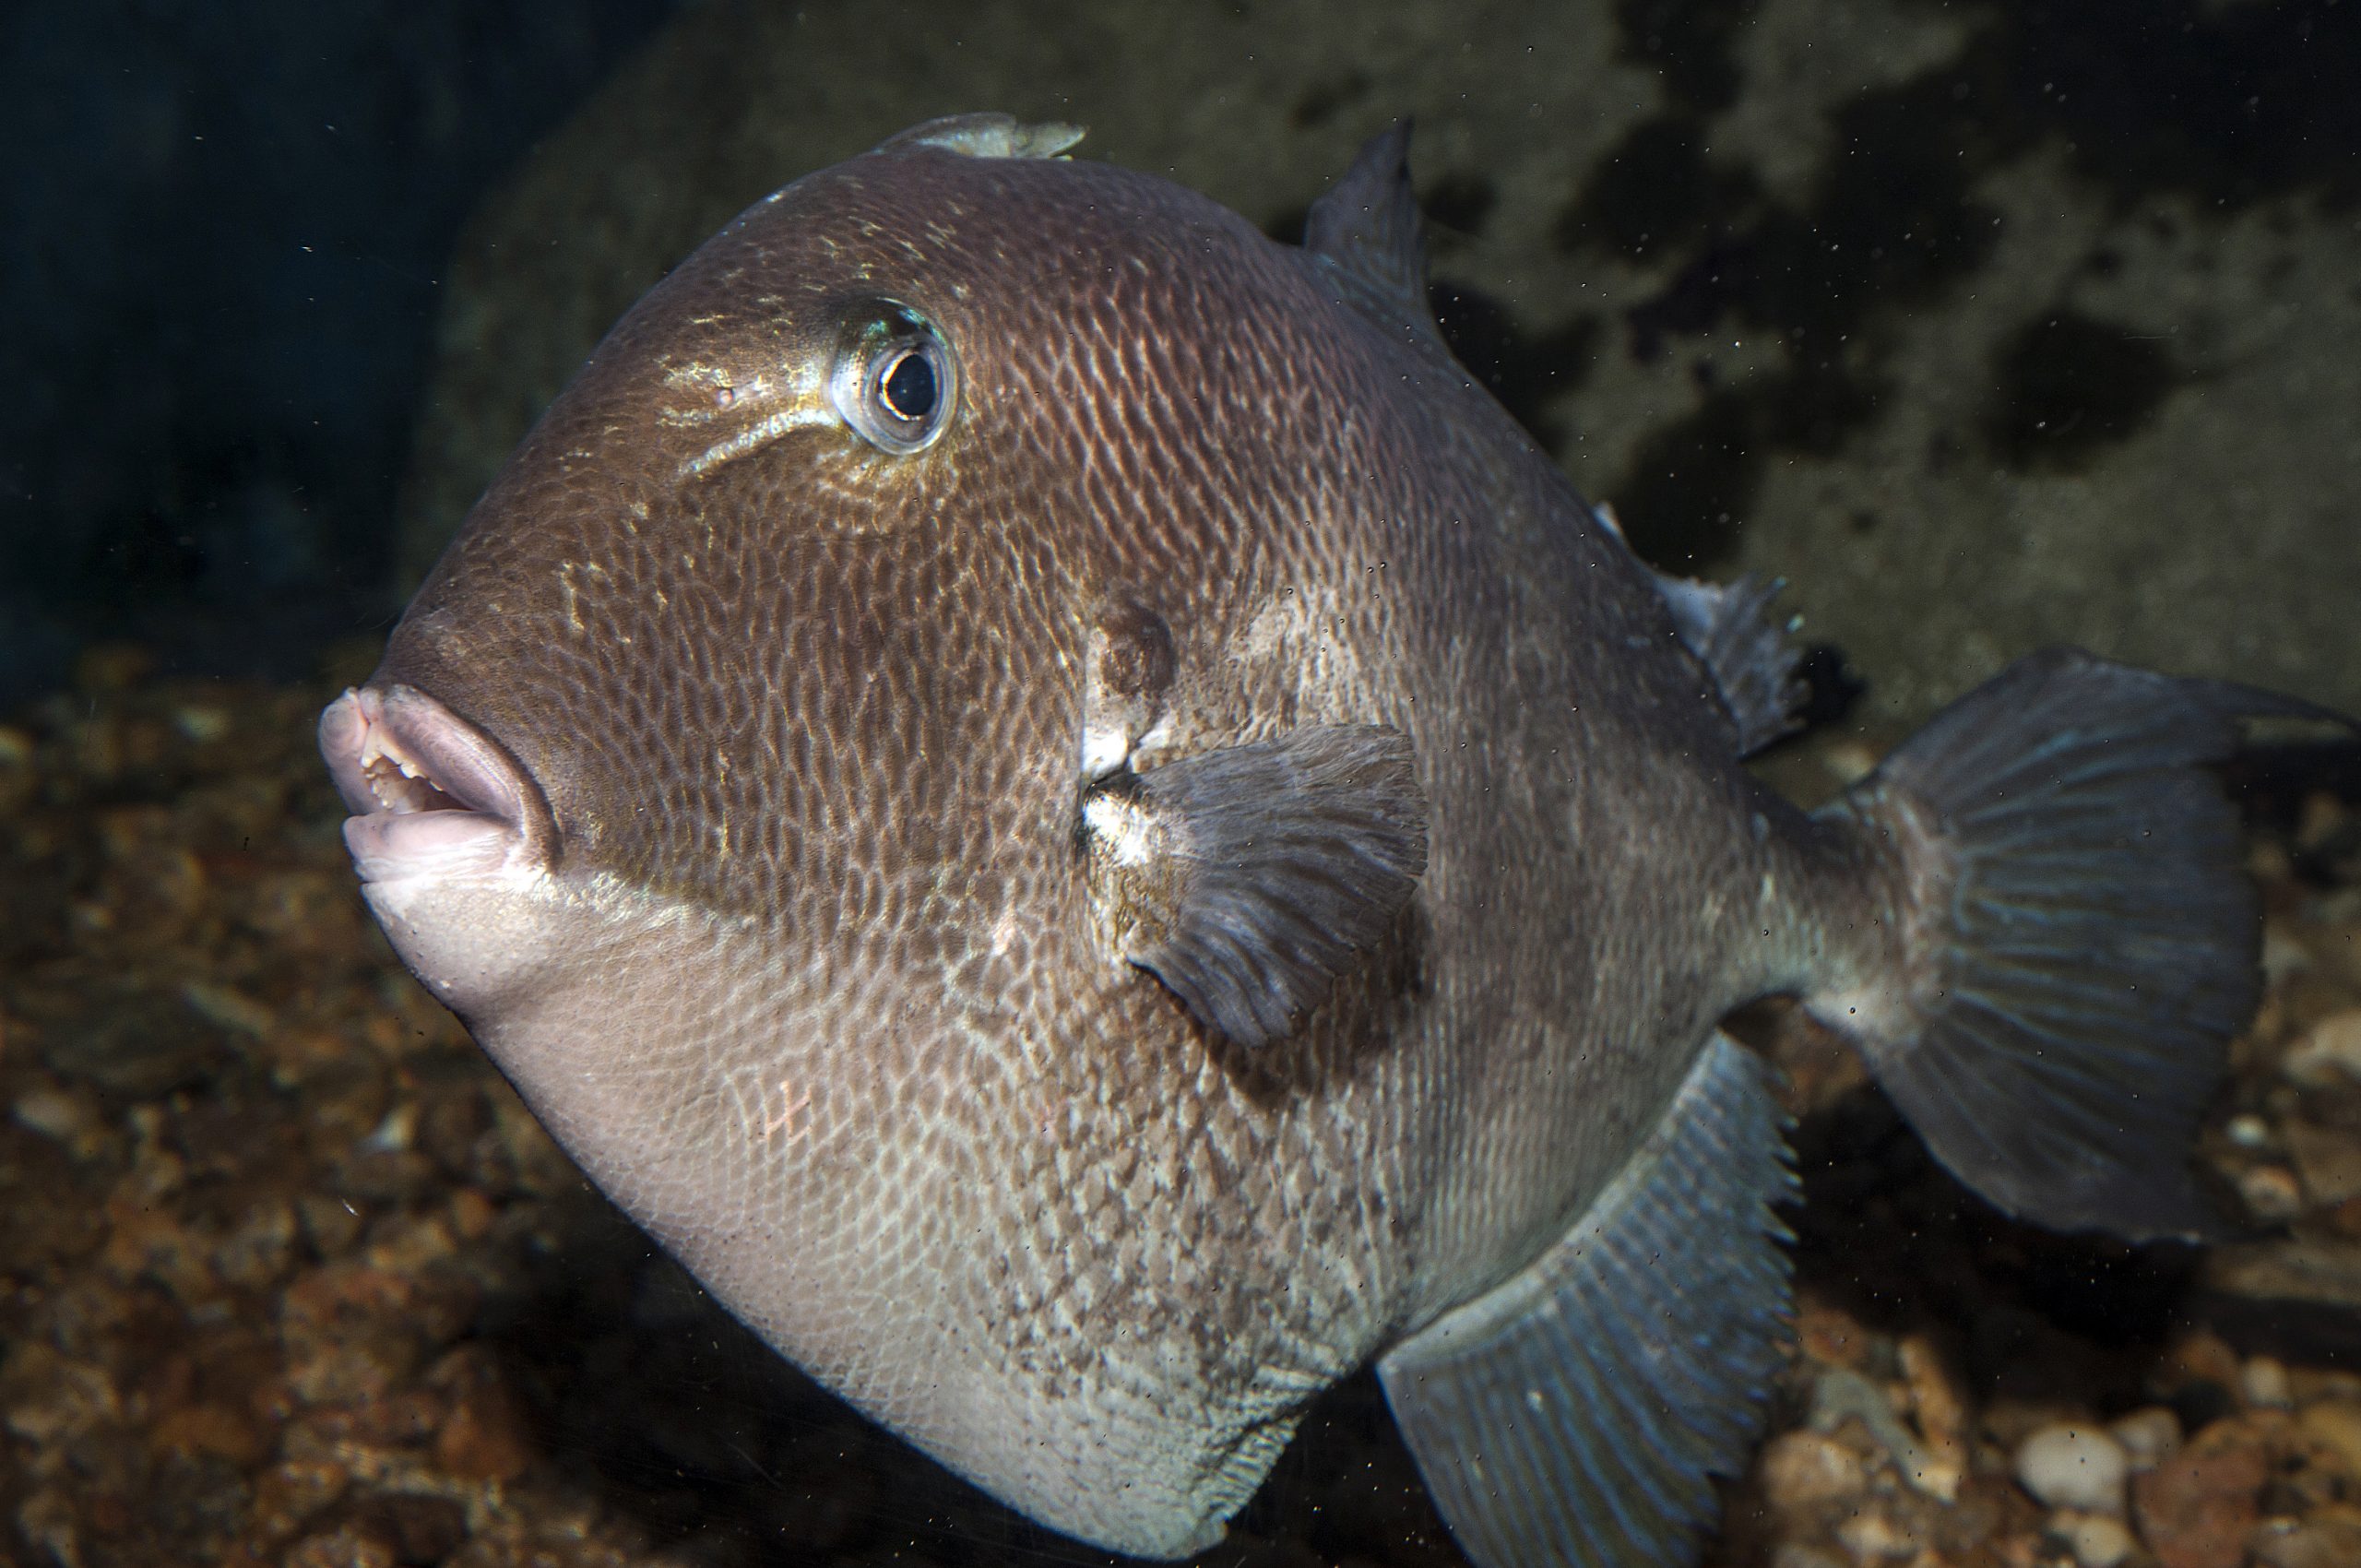 https://coastalreview.org/wp-content/uploads/2020/08/gray_triggerfish_6724-scaled.jpg